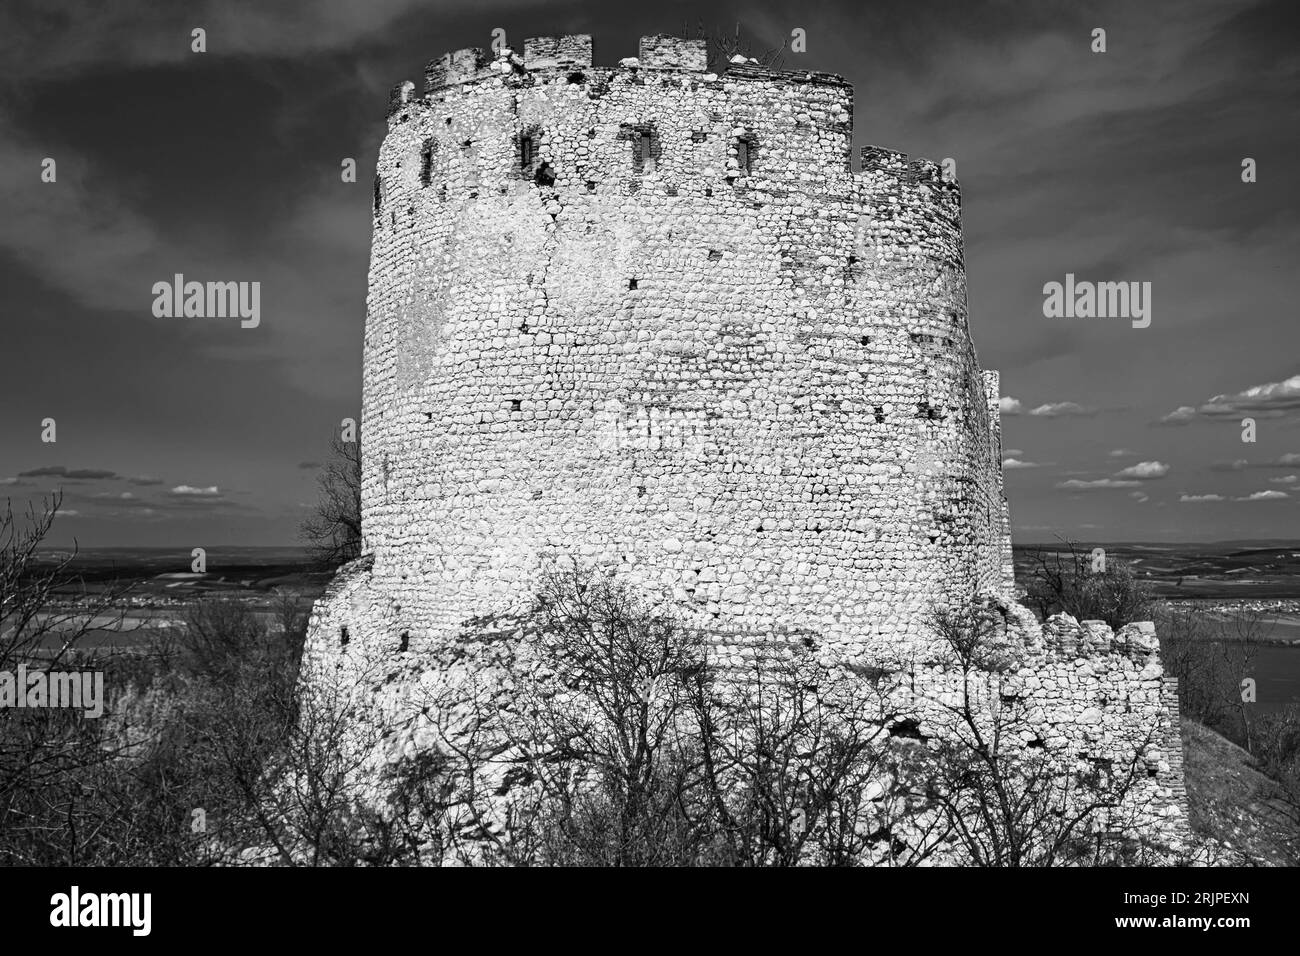 Ruins on hill, Czech Republic Black and White Stock Photo